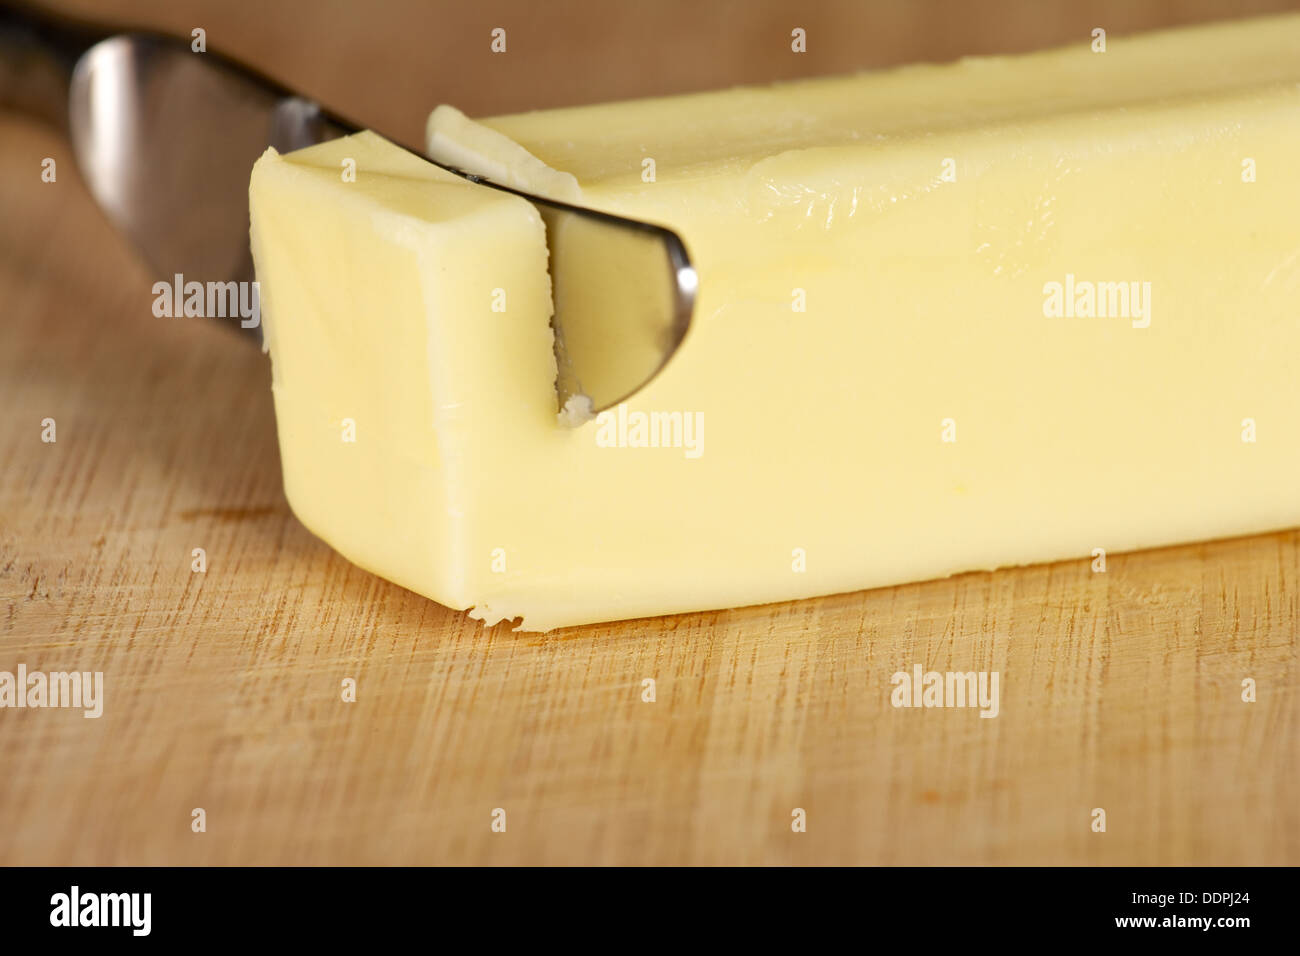 Stick of table butter on cutting board with knife Stock Photo